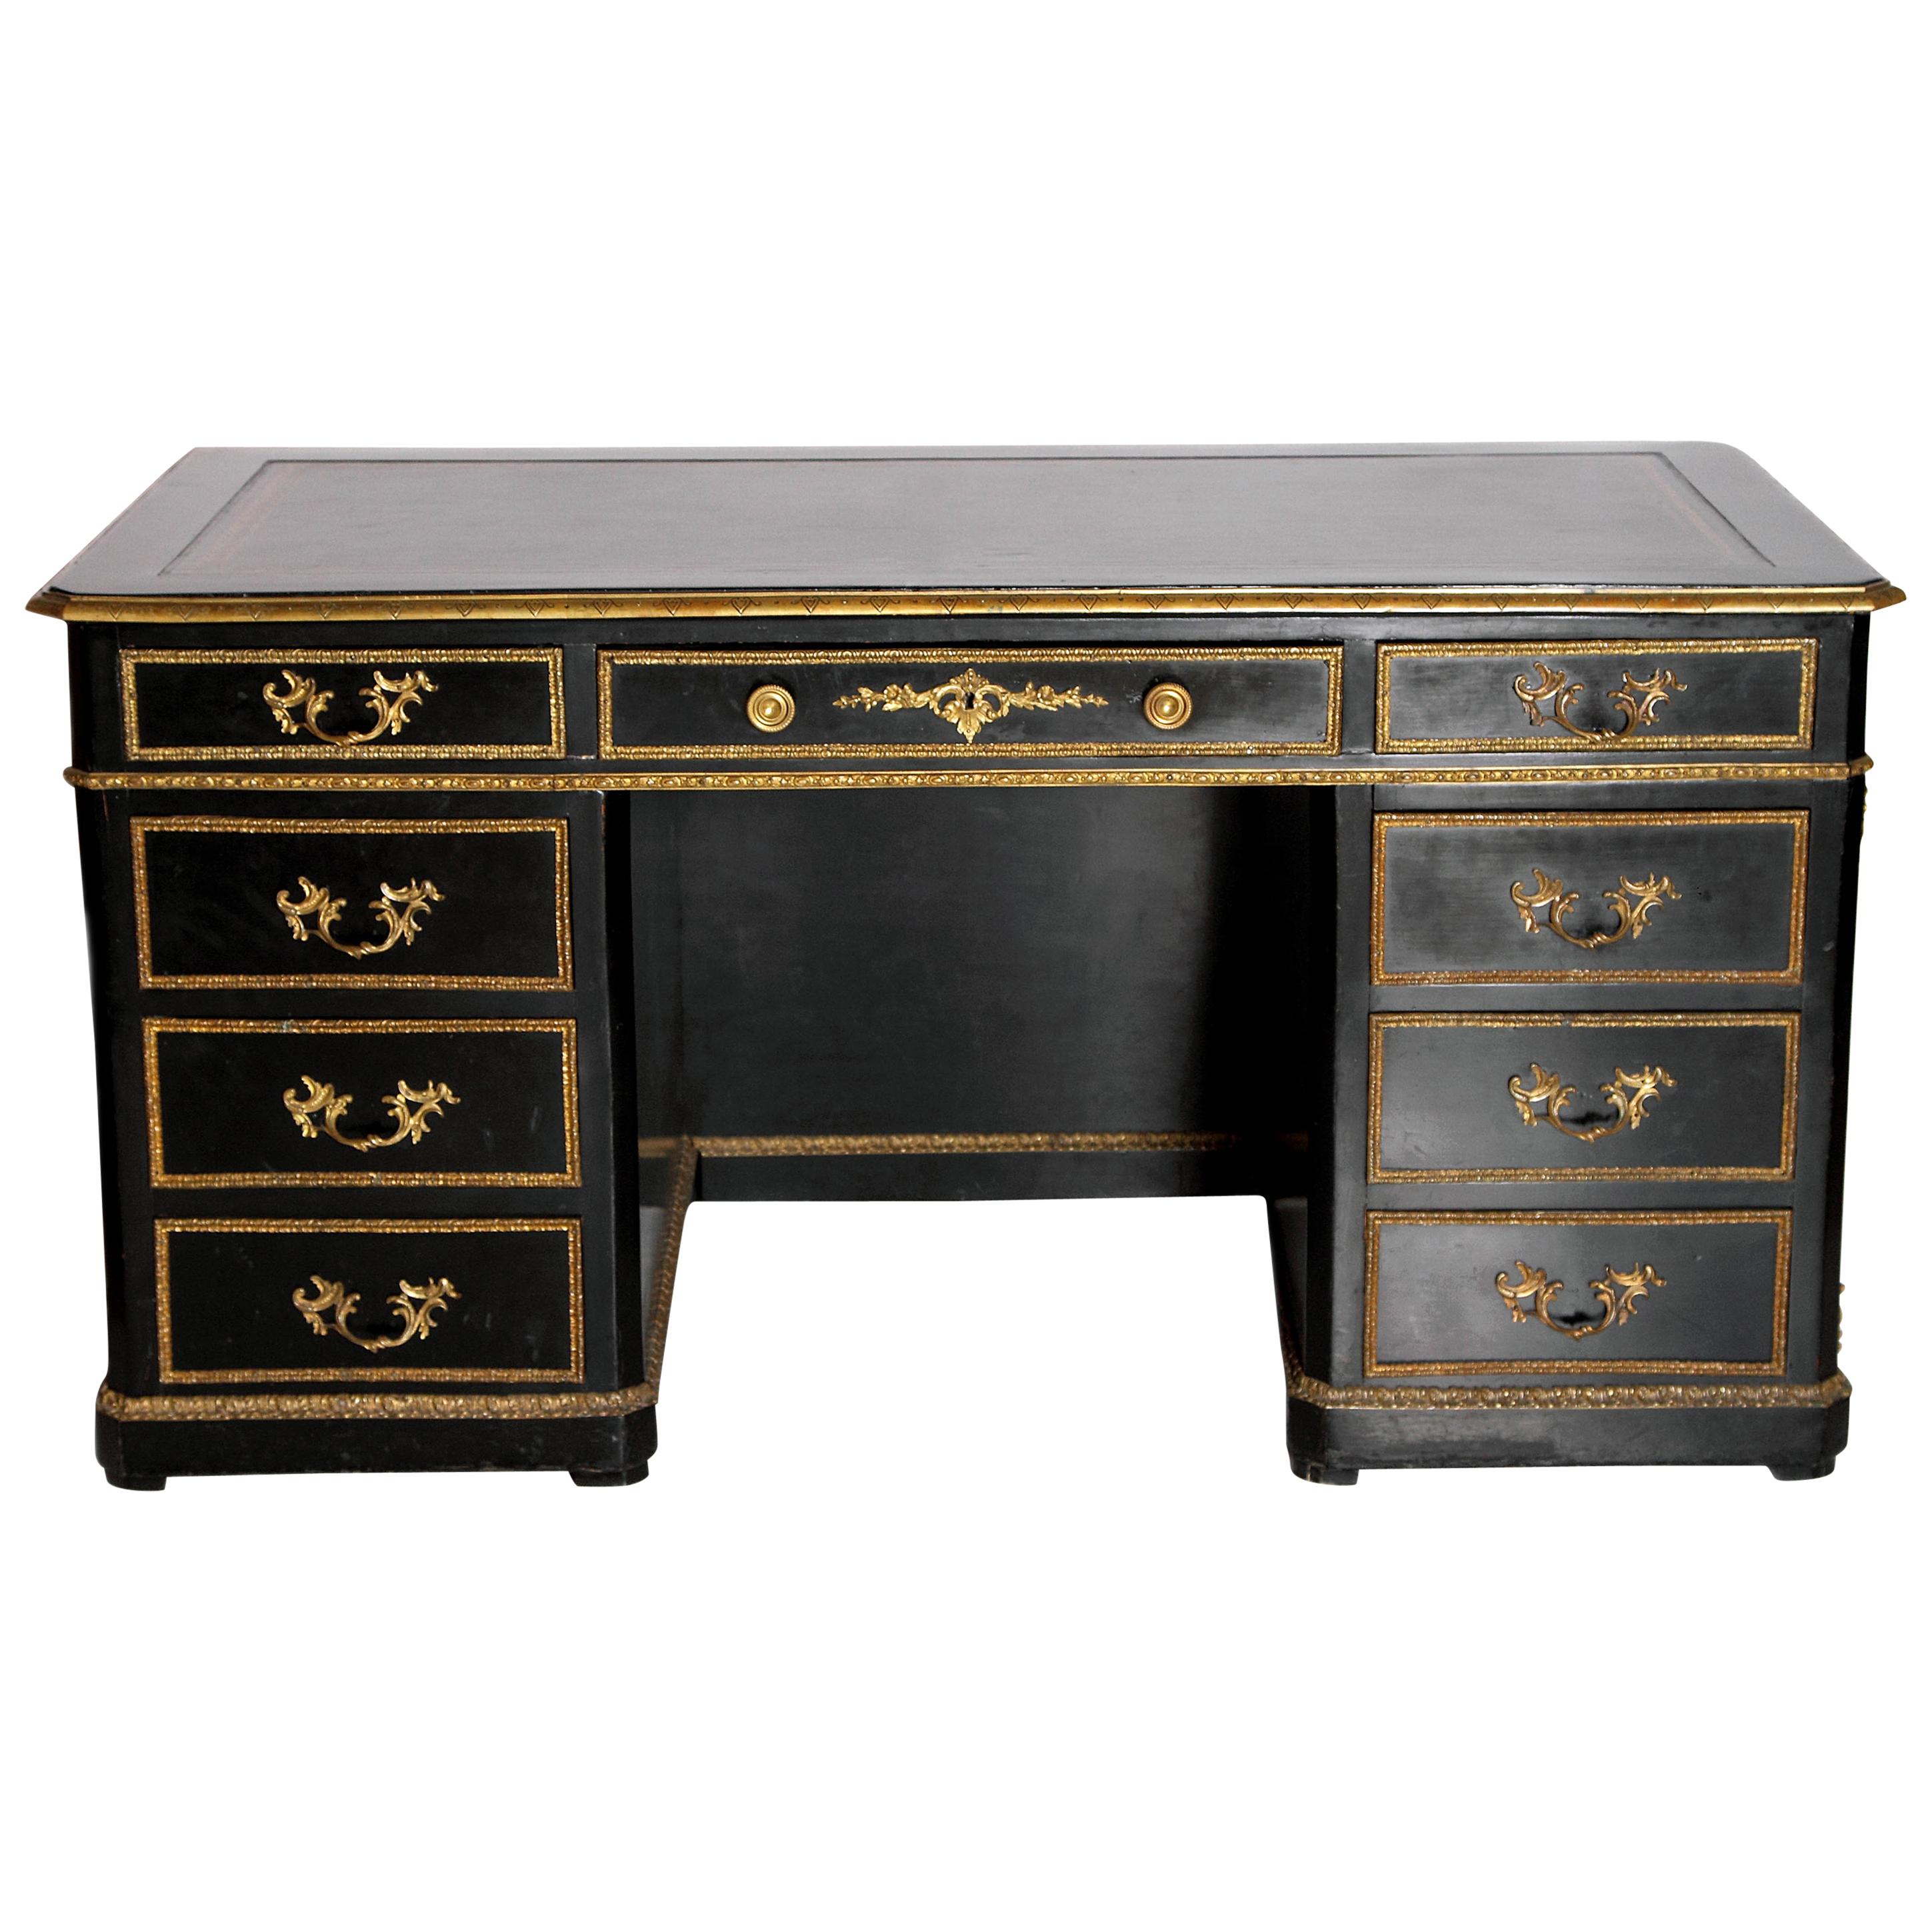 19th Century Regence Style Pedestal Desk with Black Leather Top